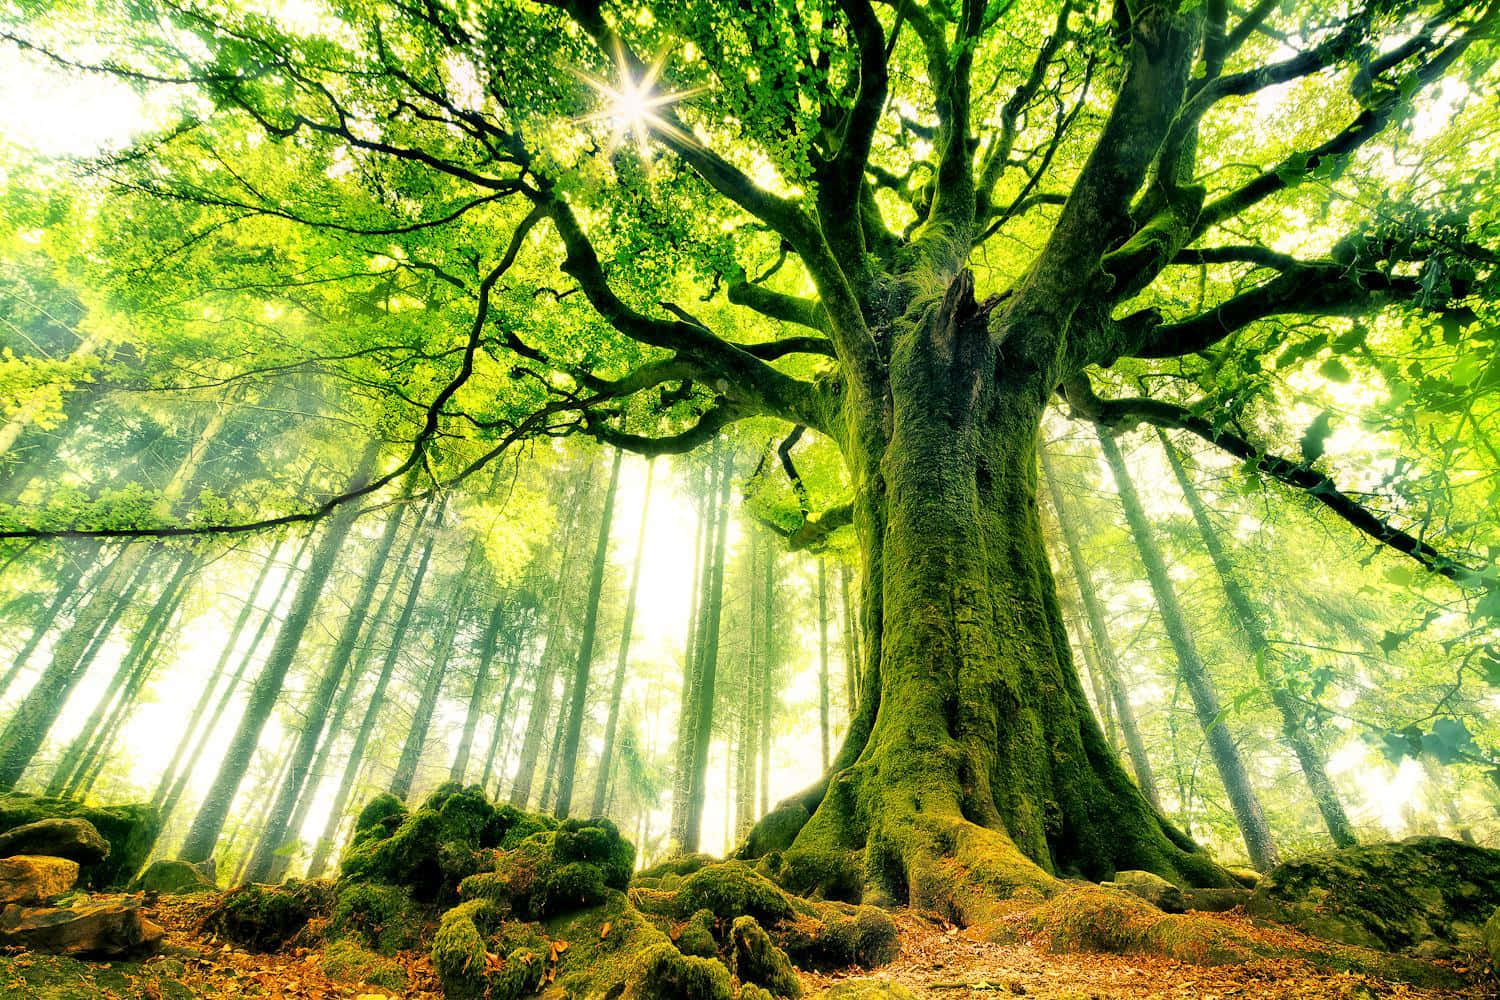 “Enjoy the Breathtaking Beauty of a Green Tree in Nature”